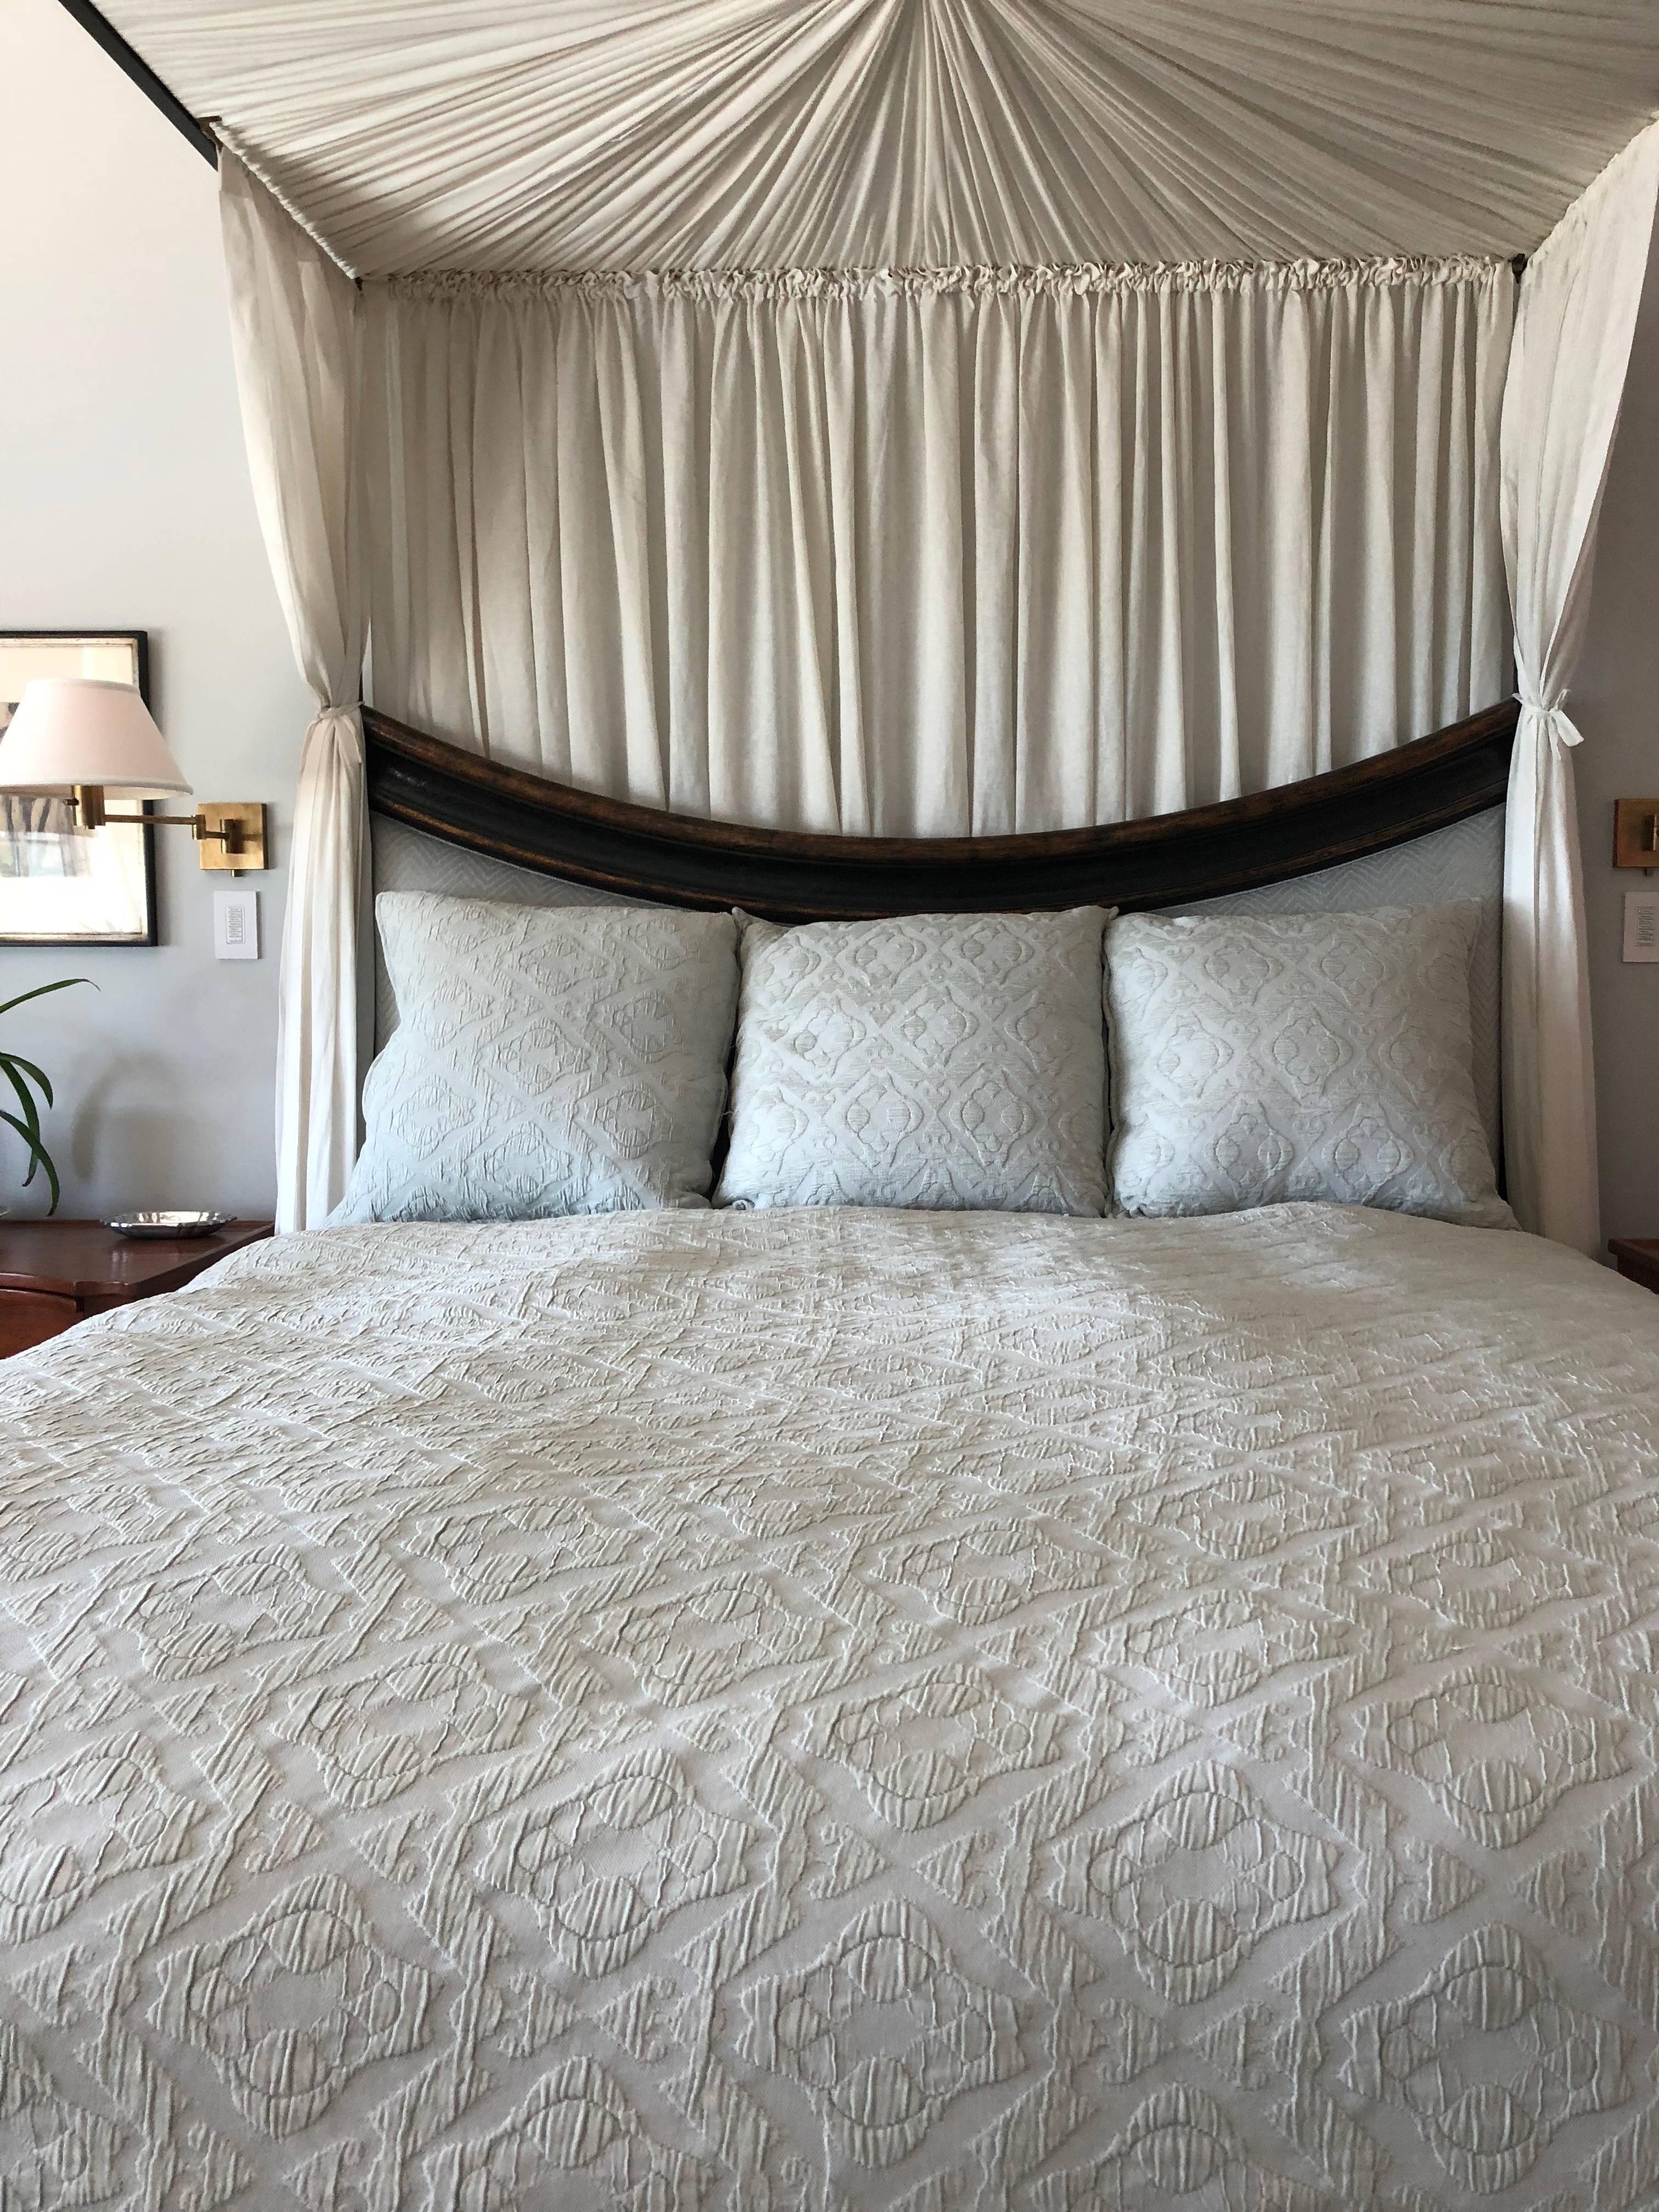 The rose tarlow, Melrose house king size prince Charles four poster bed finished in tete de negre crackled lacquer black finish and gilt trim in the chinoiserie style with squash bon feet. Hardwood finished with finals to the top of each post. This